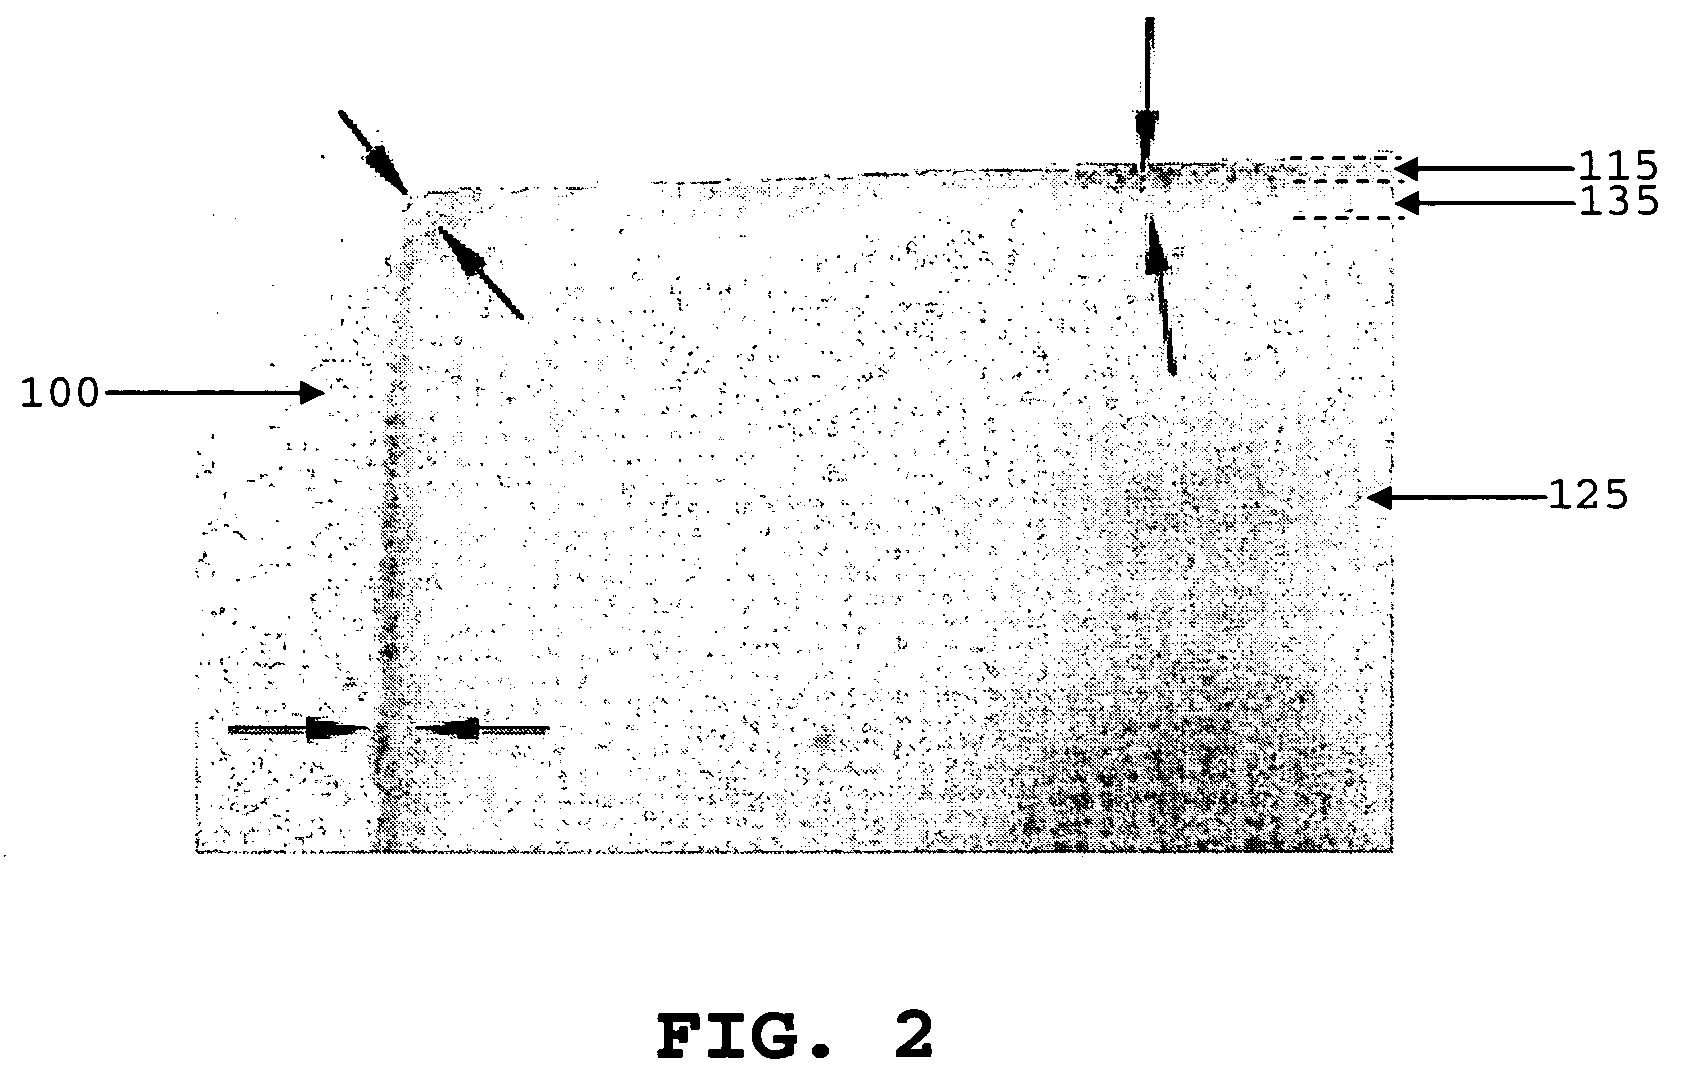 Doped ceramic materials and methods of forming the same